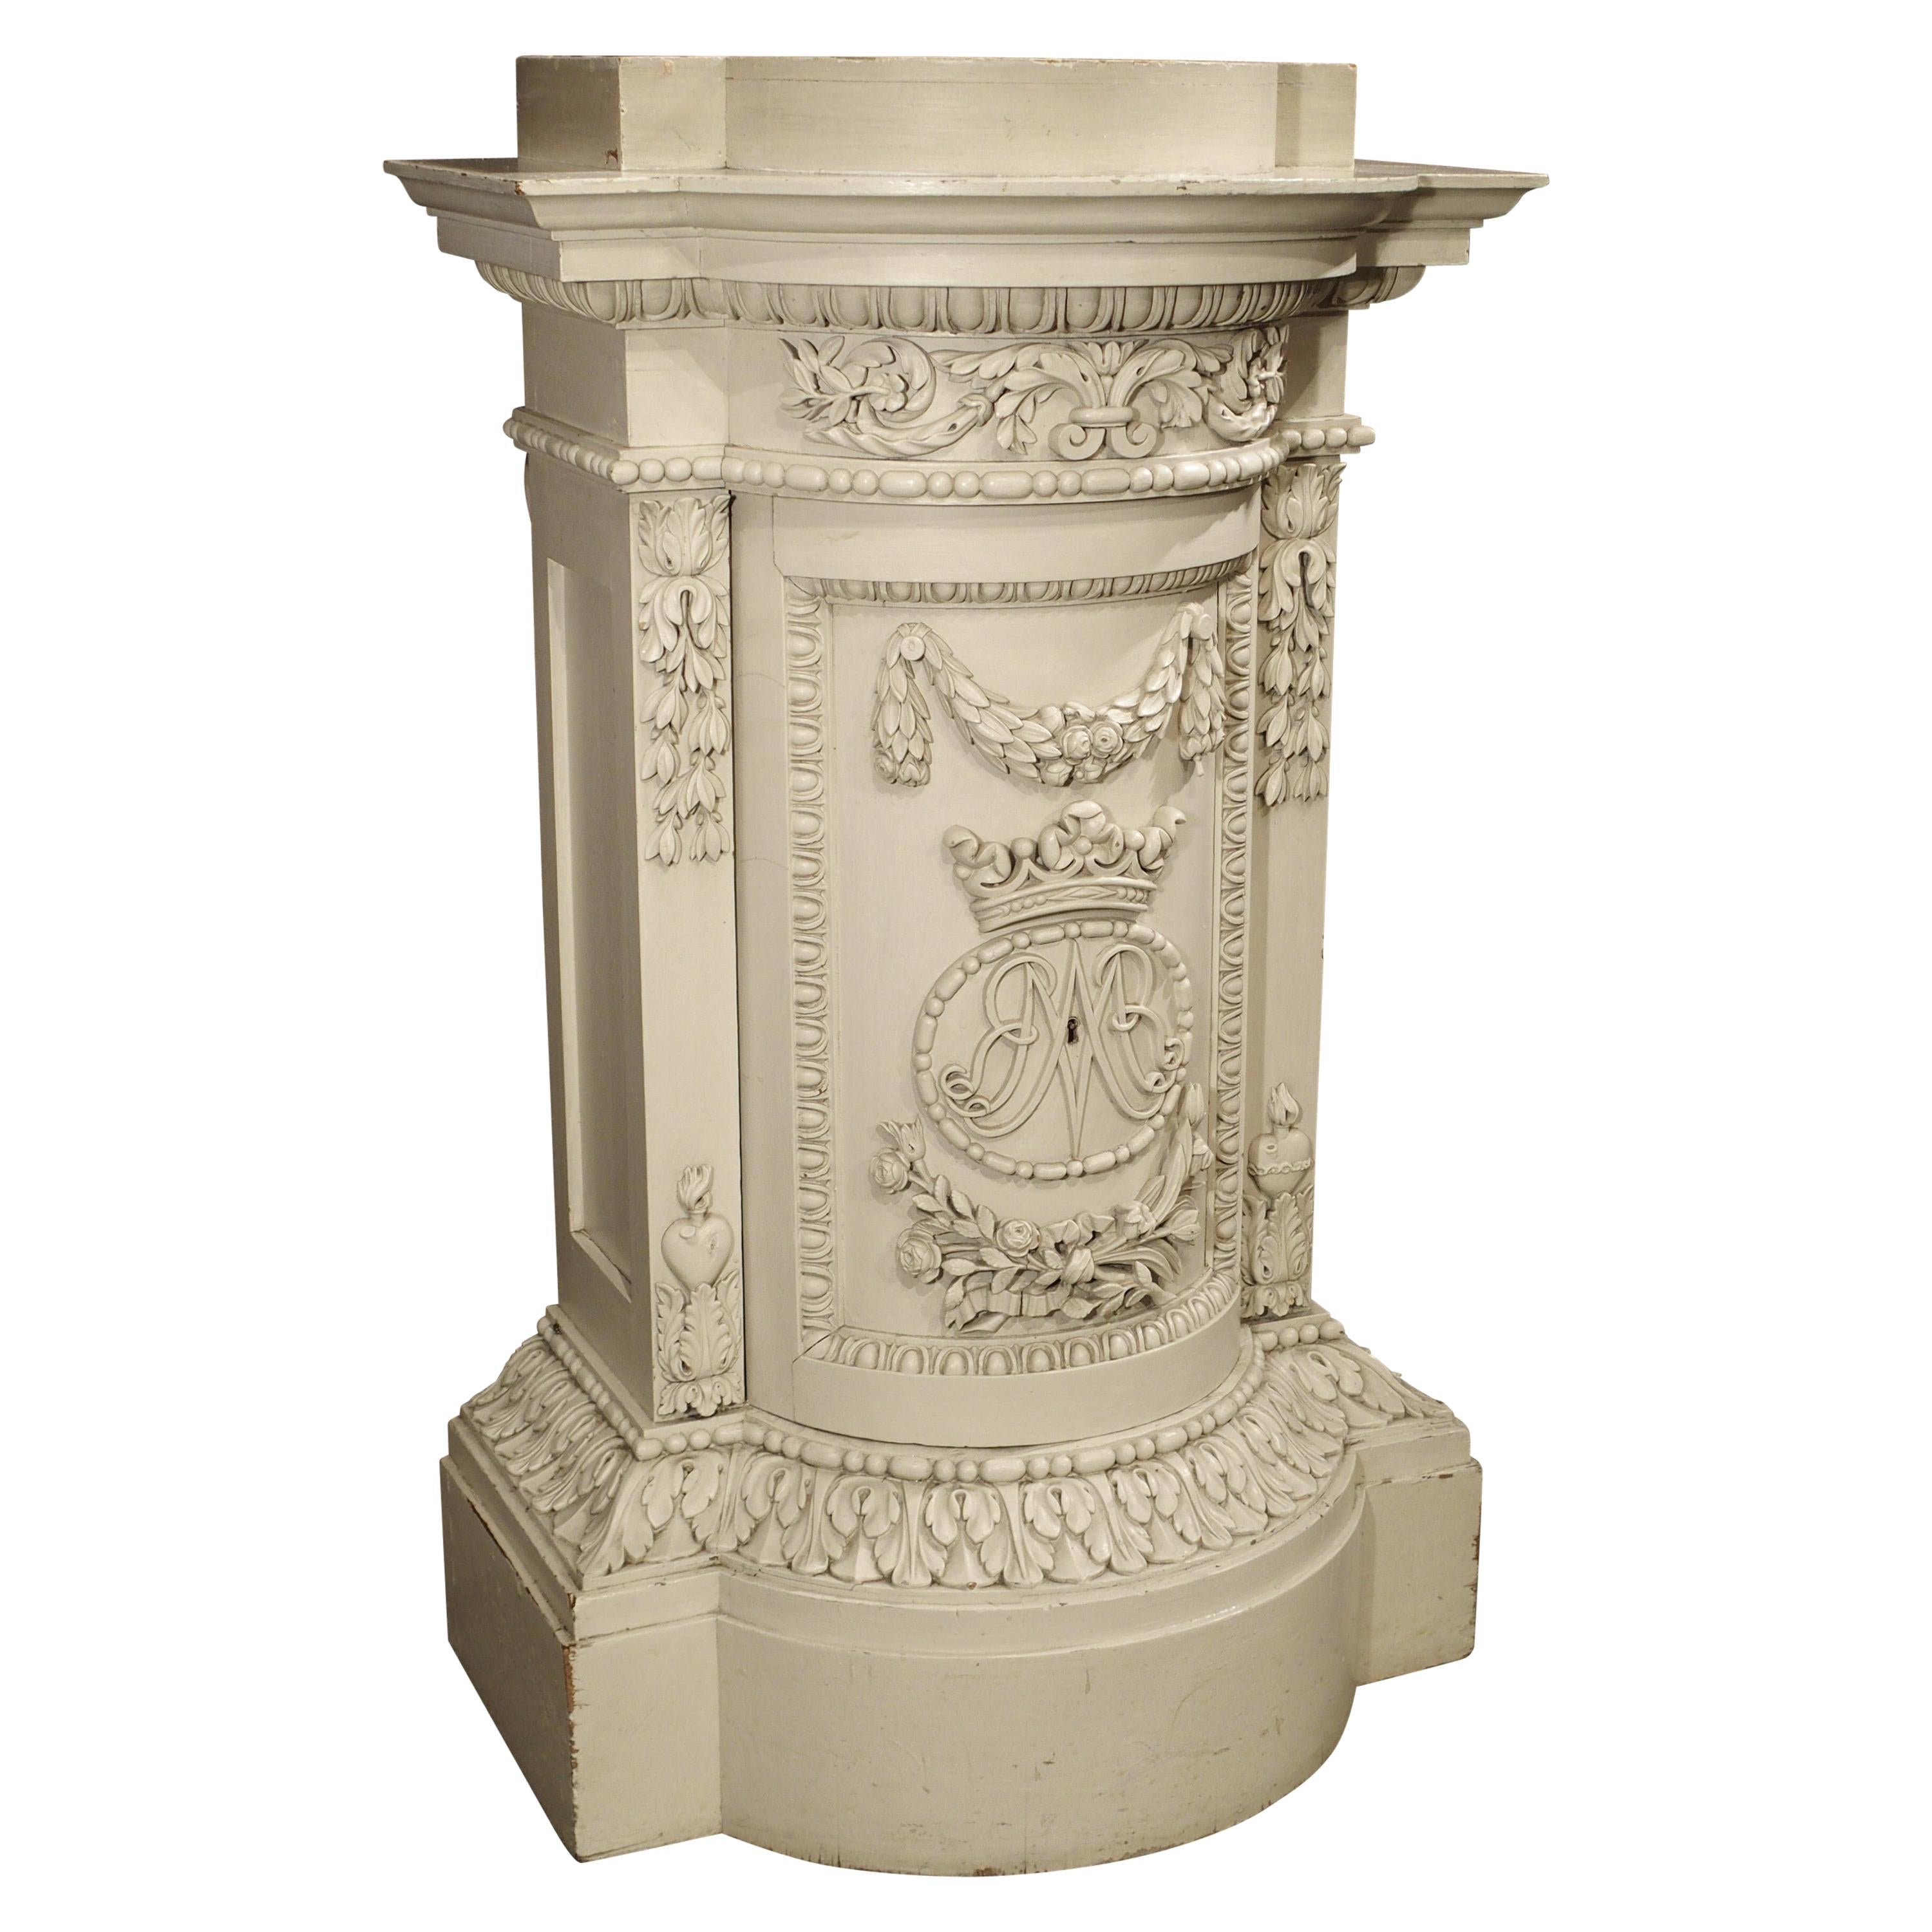 Painted 19th Century Empire Style Tabernacle Pedestal from France